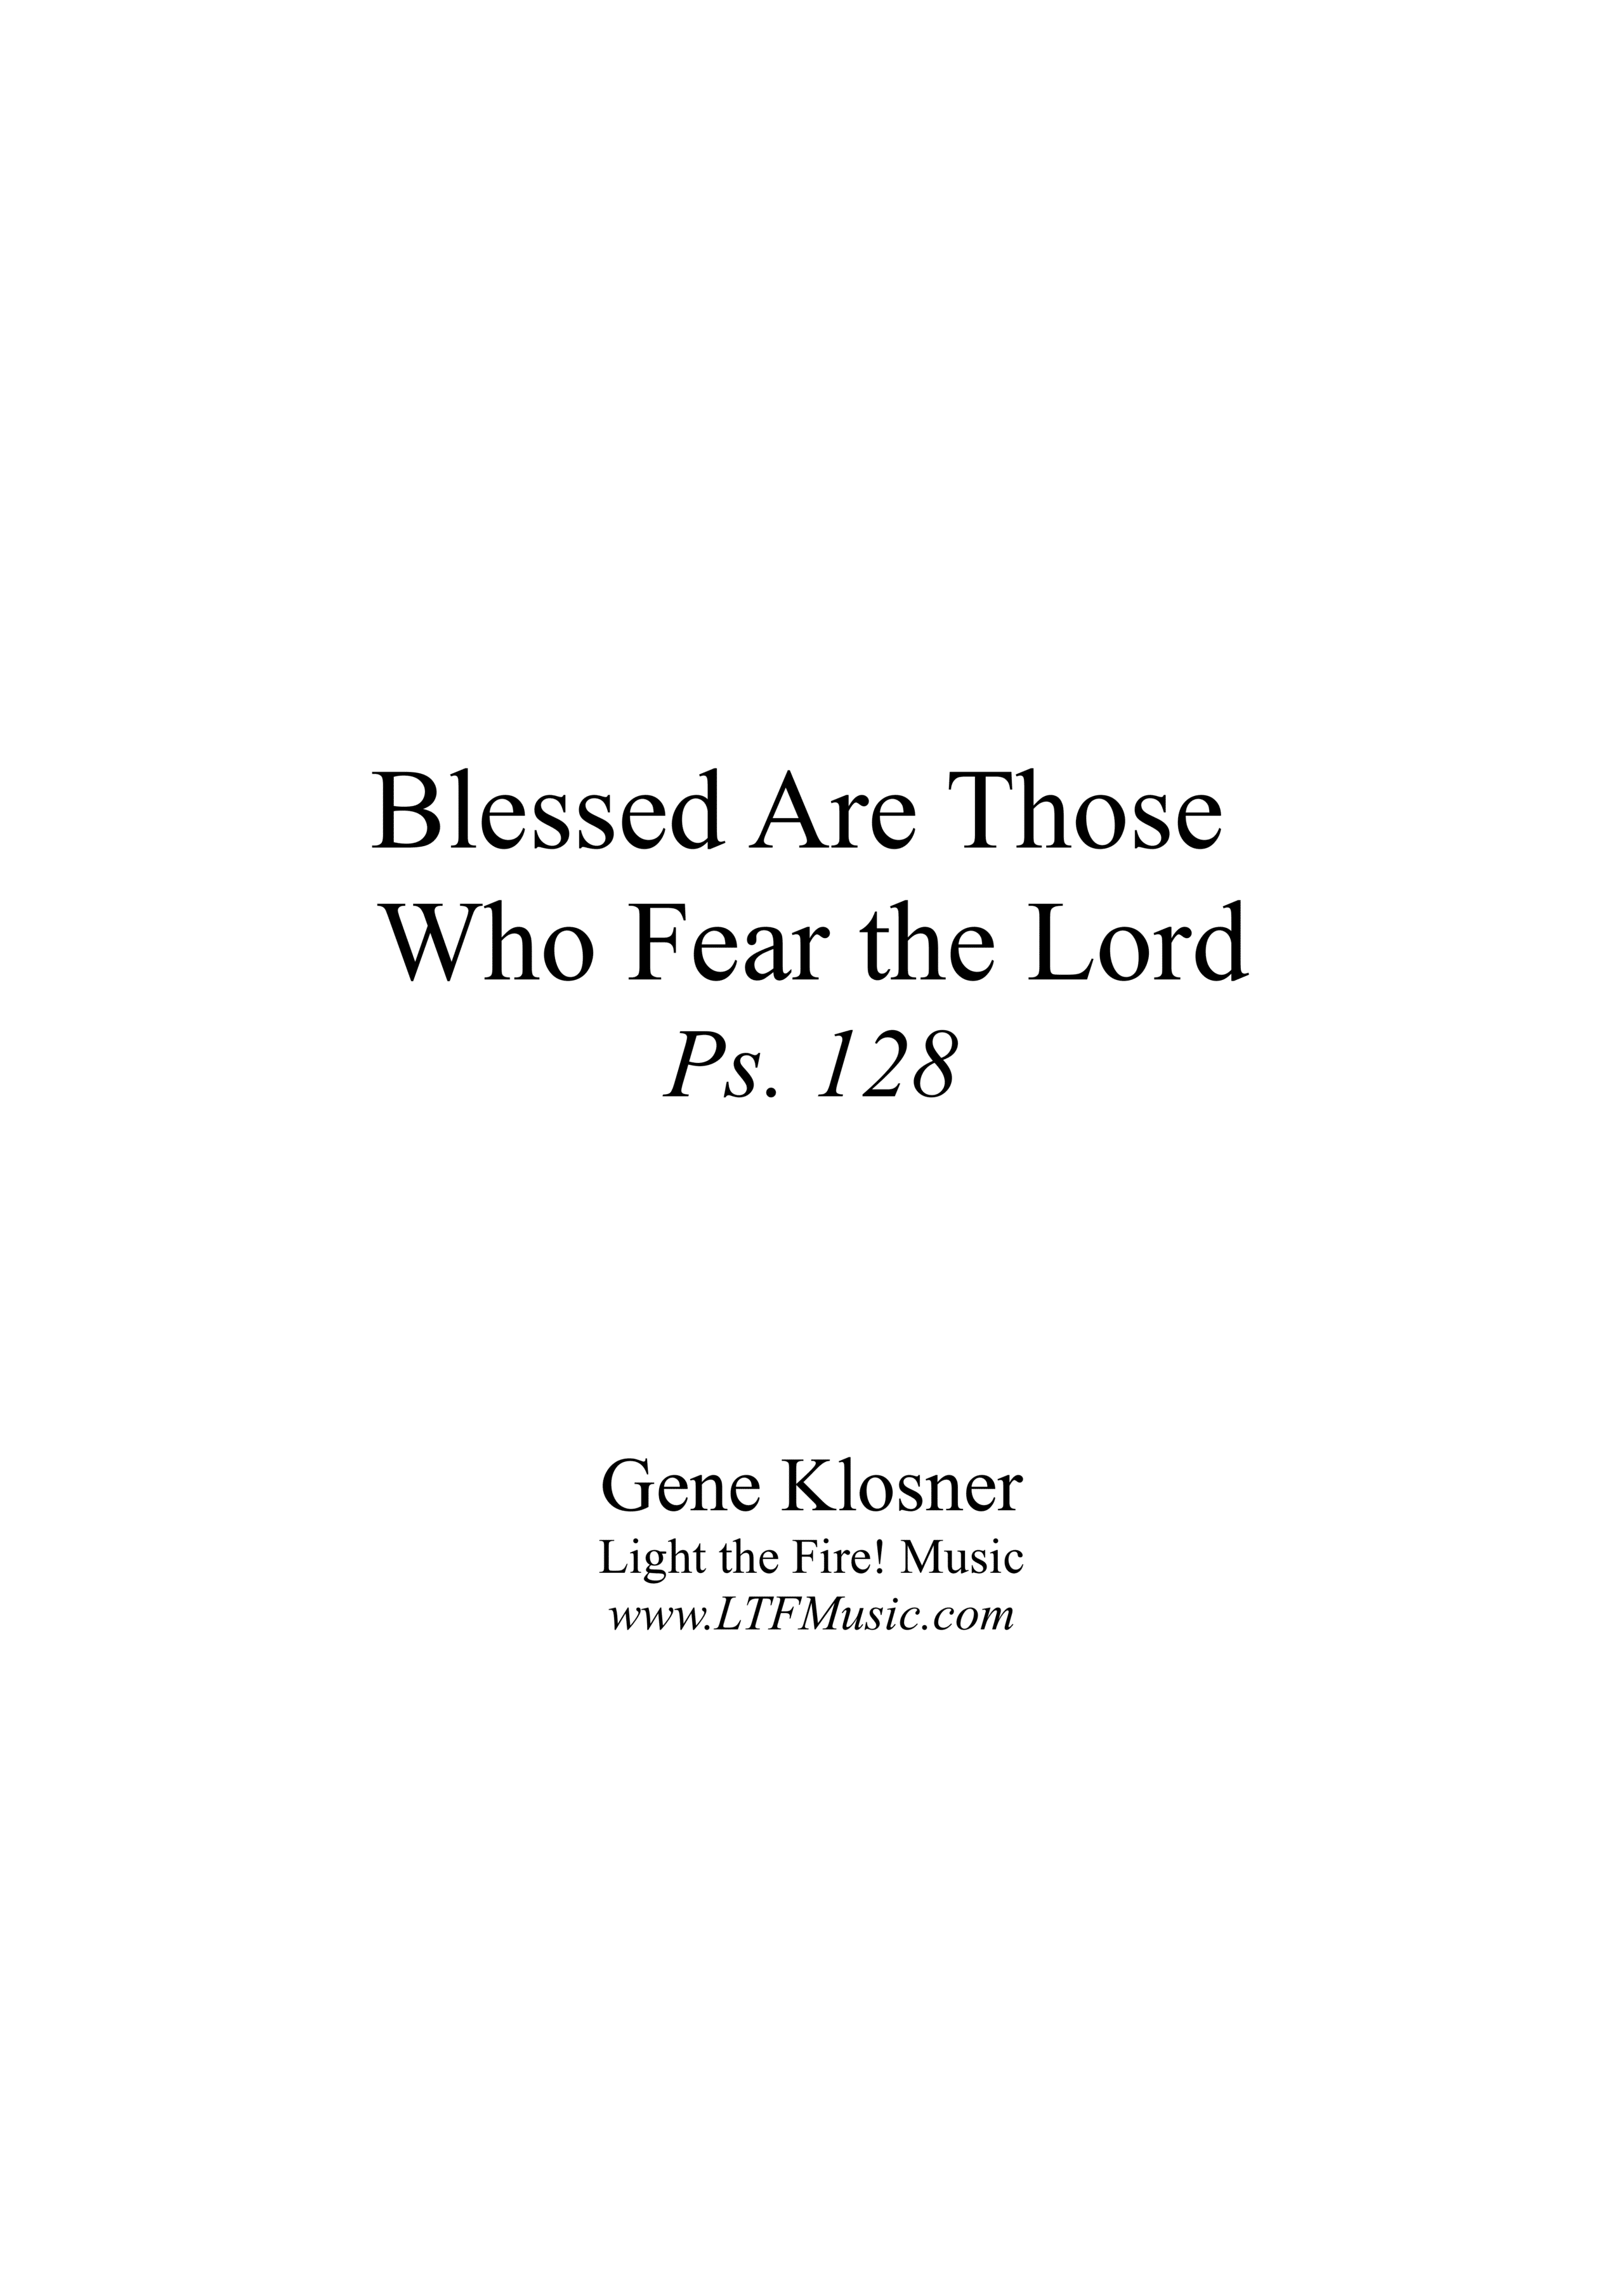 Psalm 128 – Blessed Are Those Who Fear the Lord (Klosner)